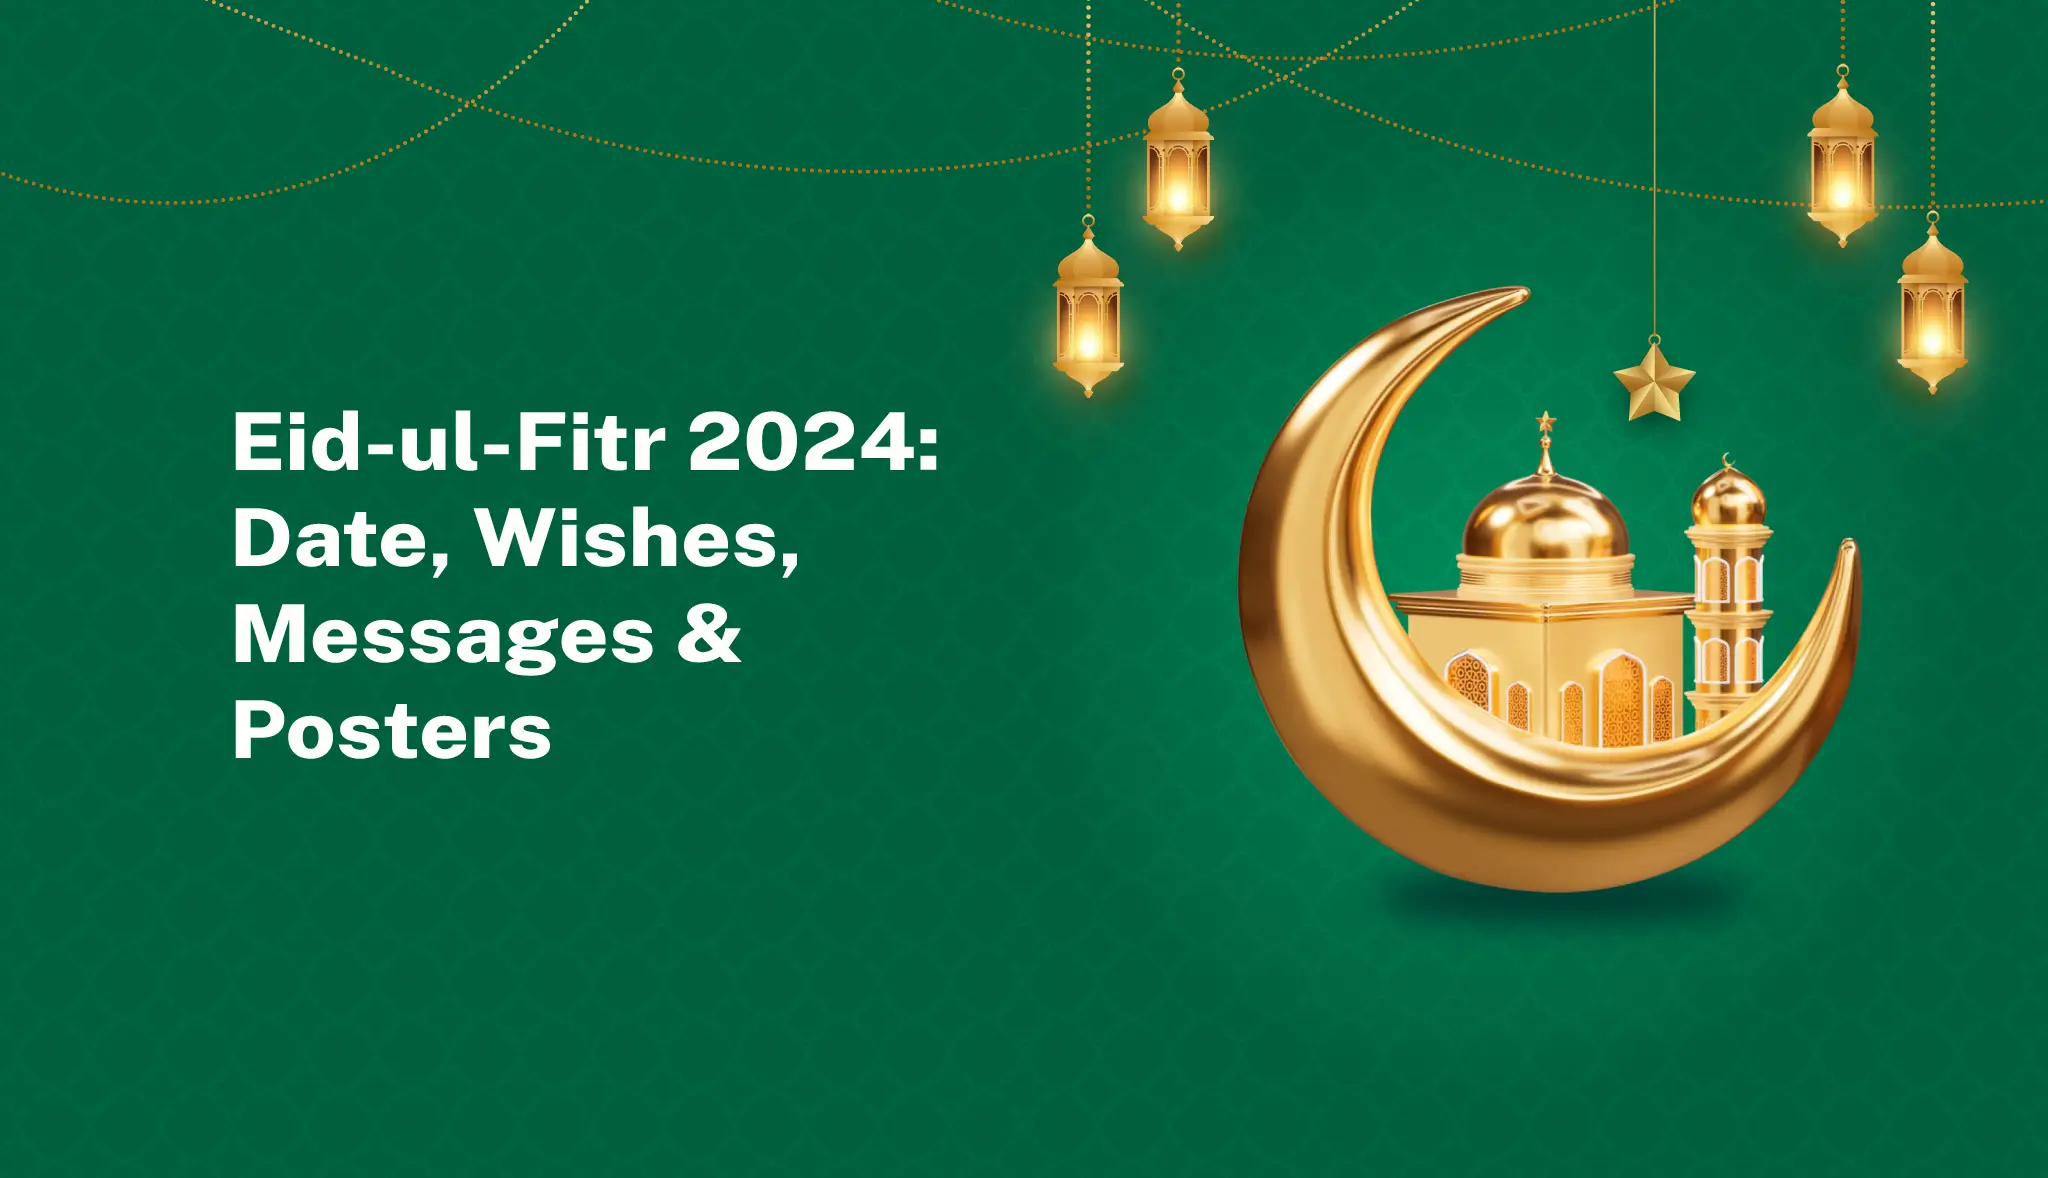 Eid ul-Fitr 2024: Date, Wishes, Messages & Posters - Postive